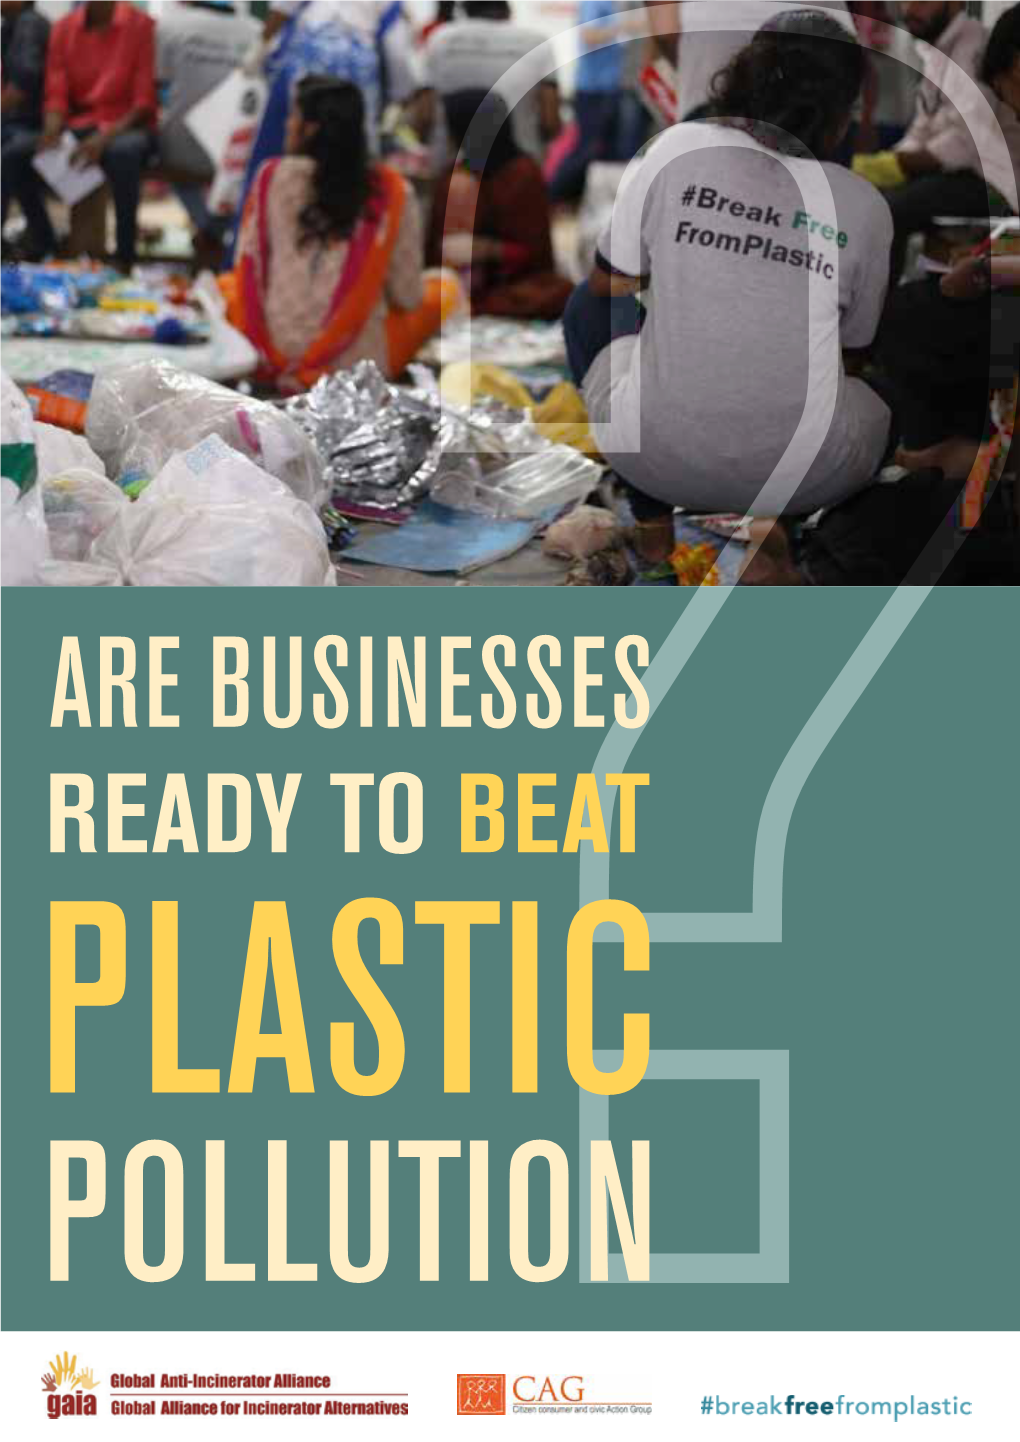 Are Businesses Ready to Beat Plastic Pollution?